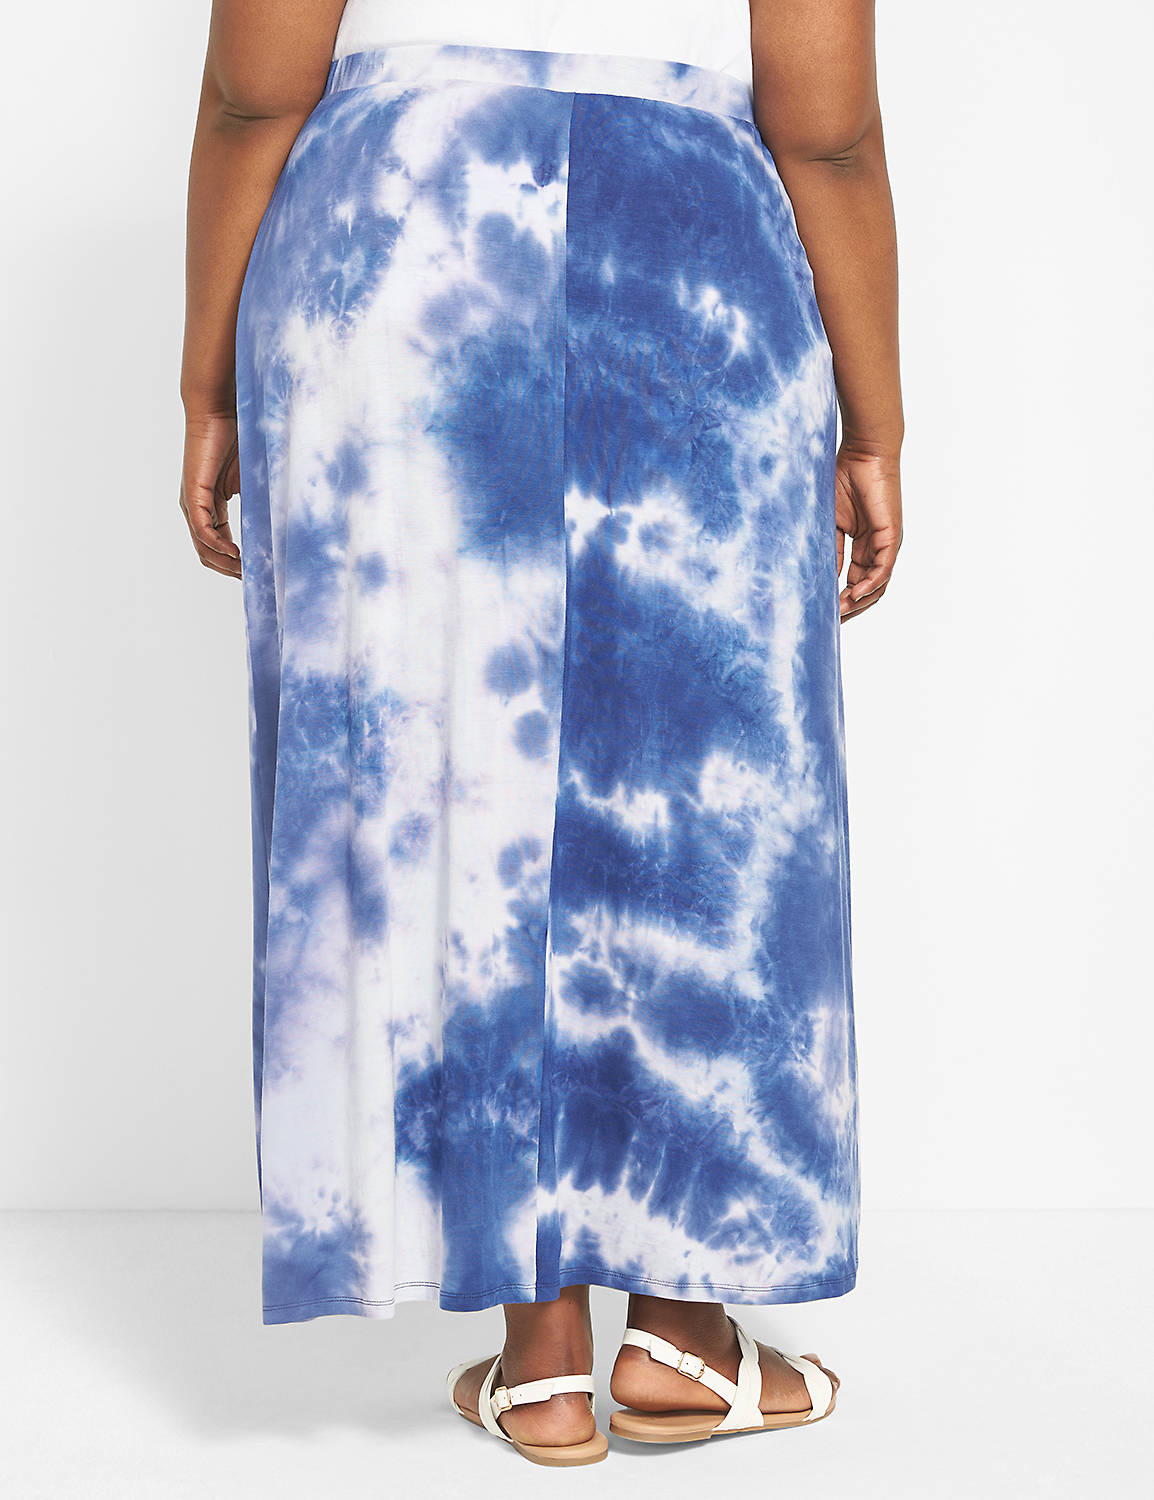 Pull On Knit Maxi Skirt - Tie Dye 1 Product Image 2